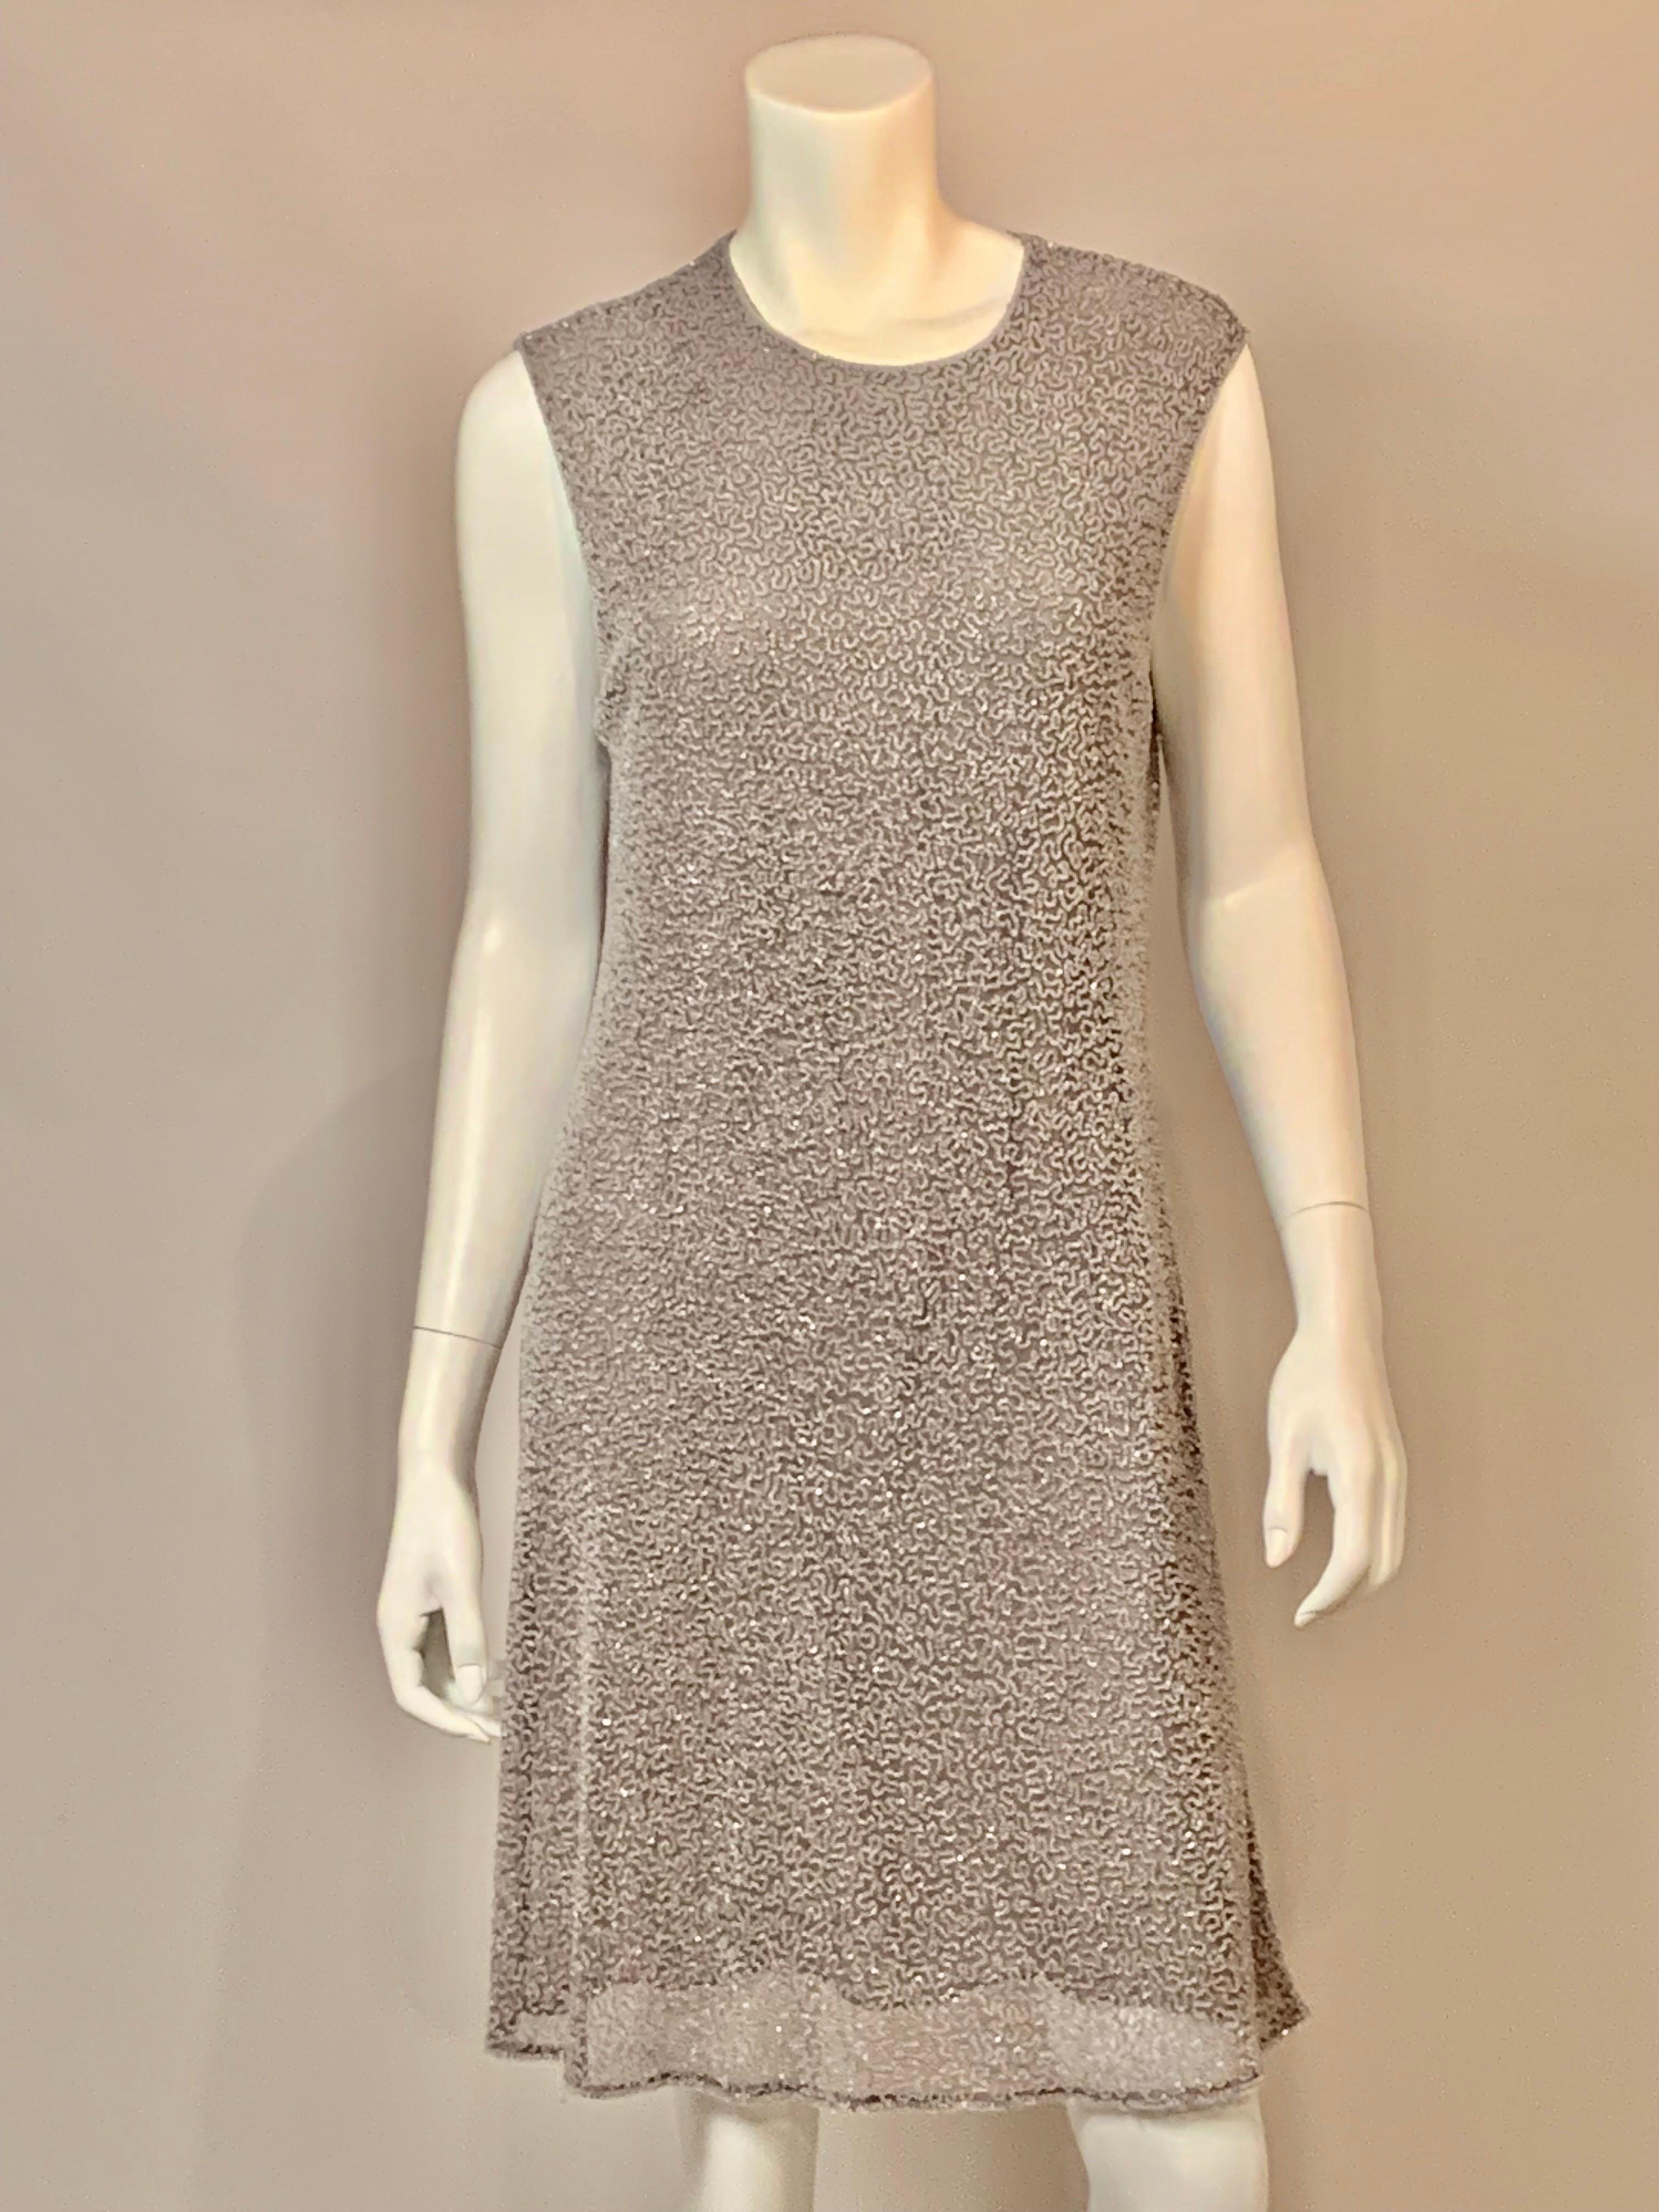 This effortlessly elegant dress from Badgley Mischka is covered with clear beads in a vermicelli pattern on grey tulle.  The dress is lined with a darker grey silk with a center back zipper.  The edges are accented with a double row of beads and the